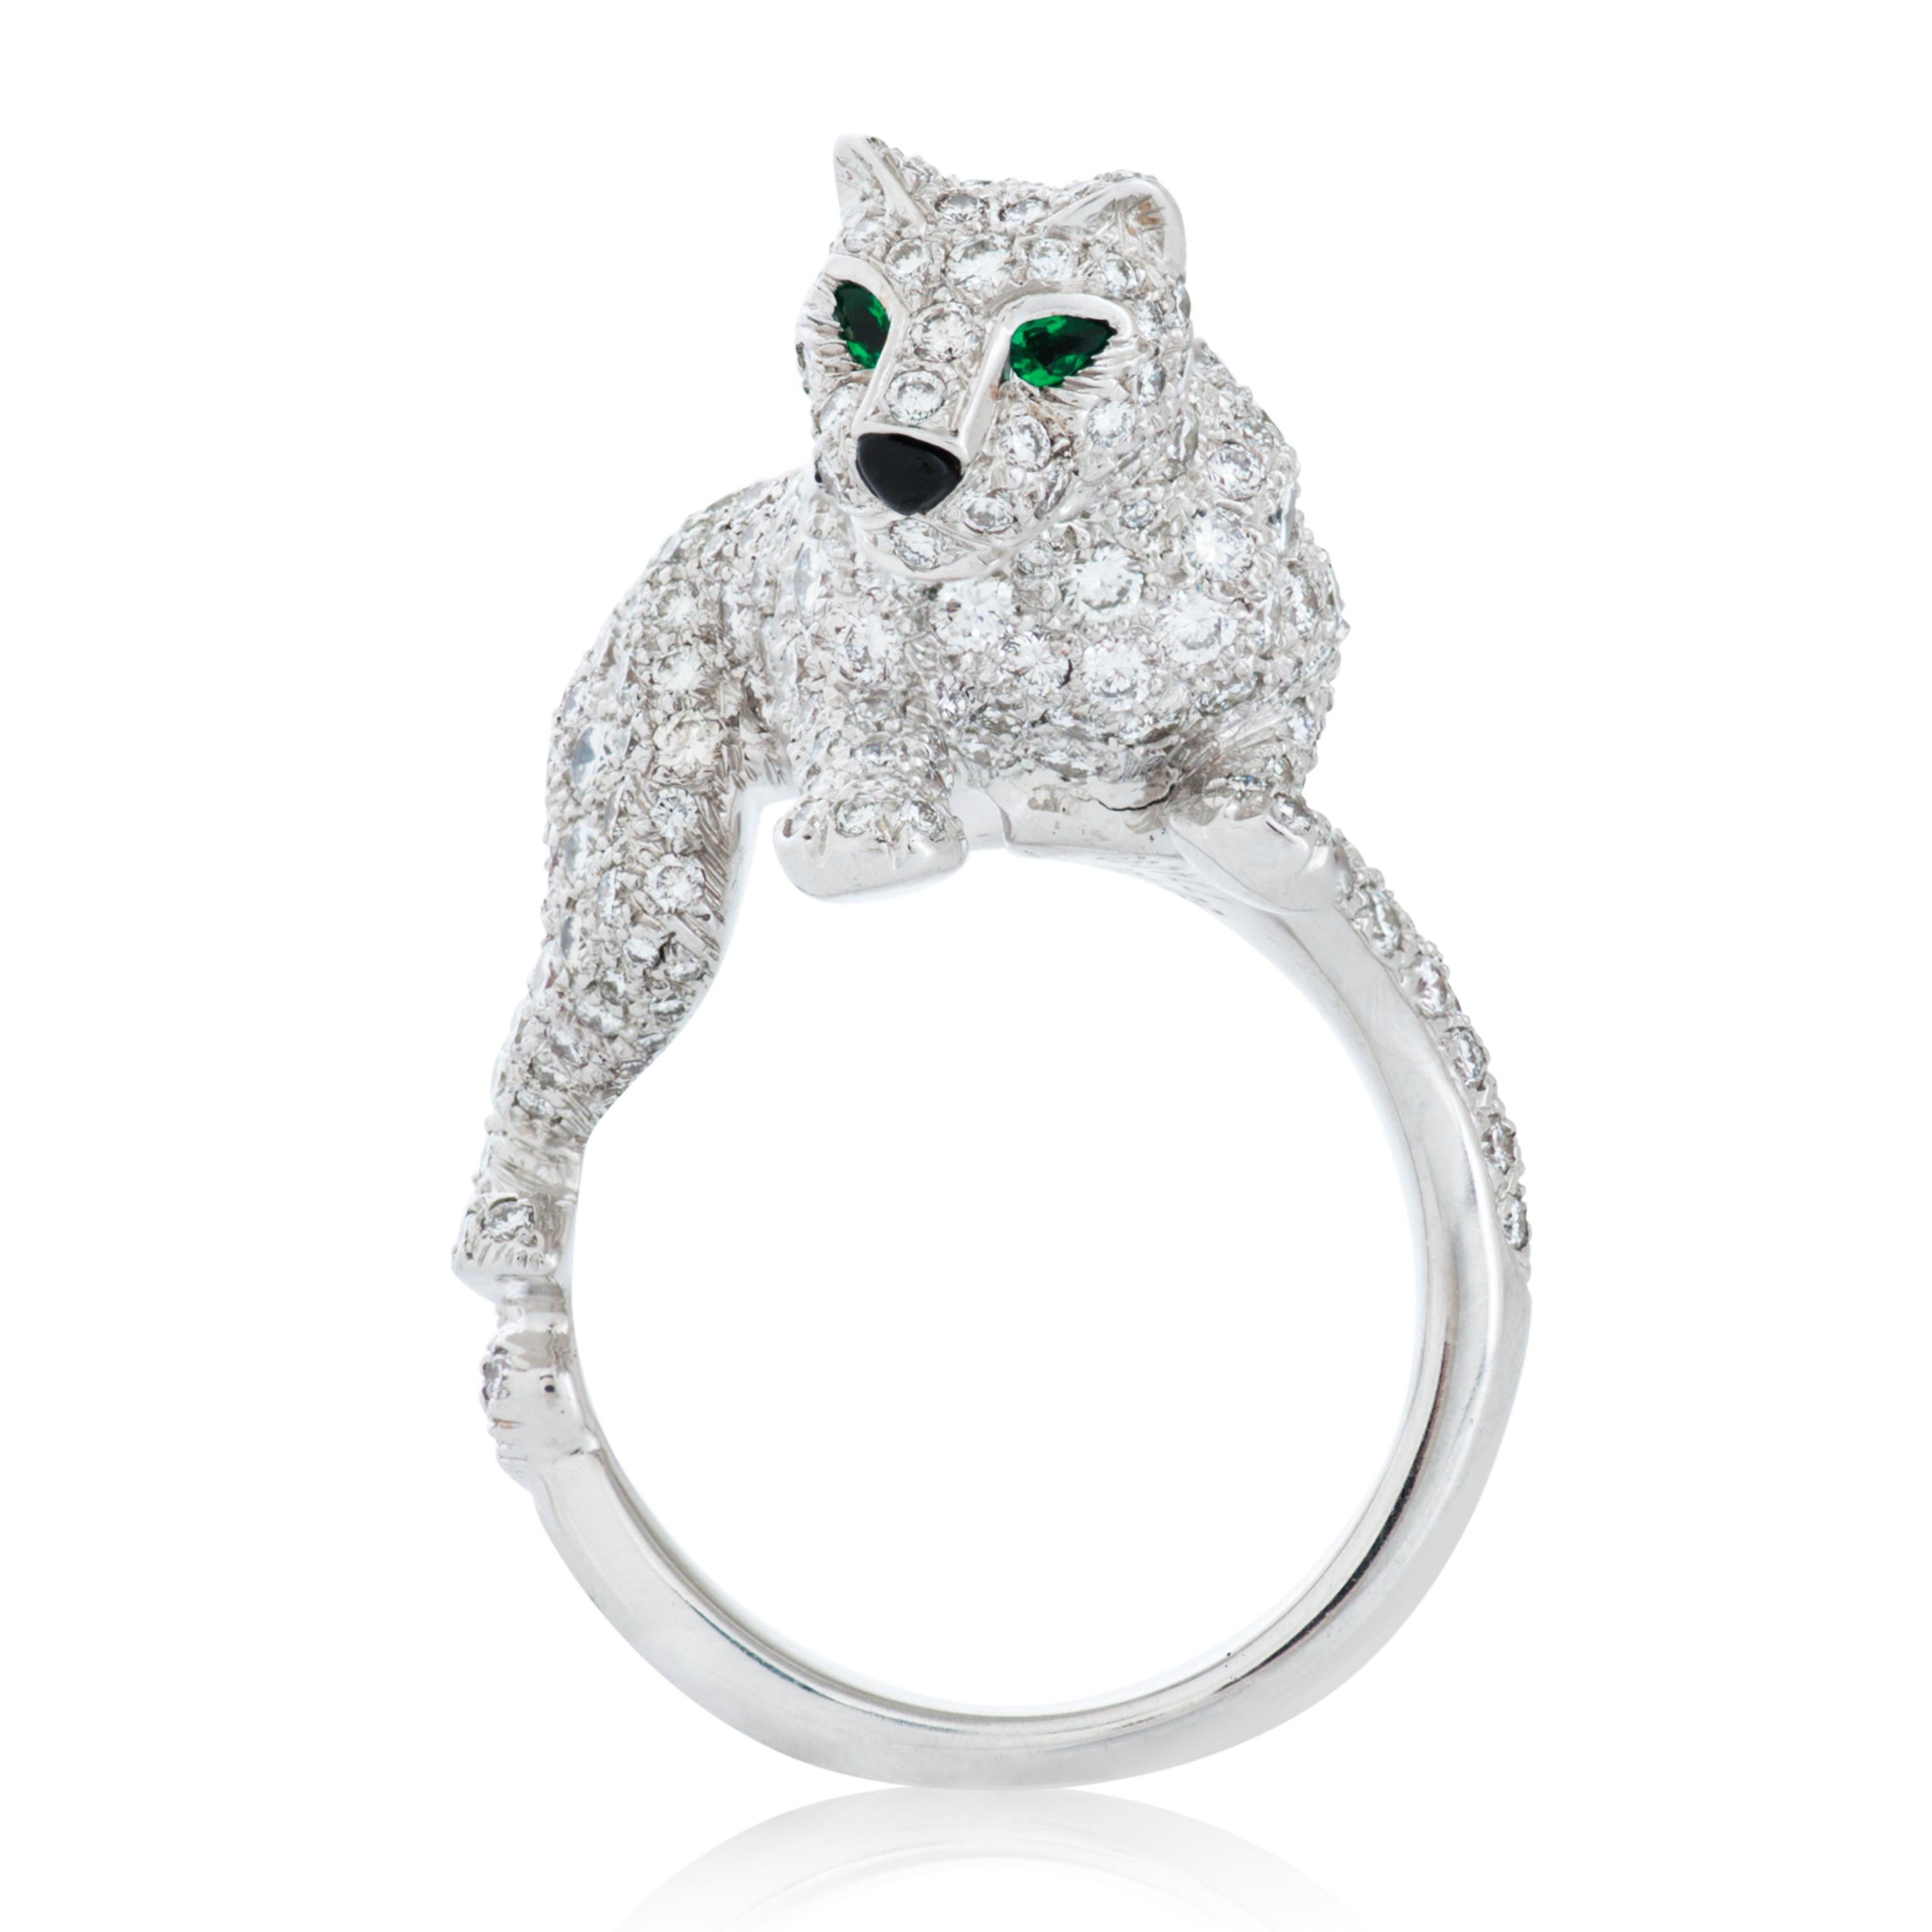 Vintage 18k white gold diamond Panthere De Cartier walking panther ring with emerald and onyx accents.

This Cartier ring features approximately 3.30 carat of round brilliant cut diamonds with F-G color and VS clarity, as well as two pear shape